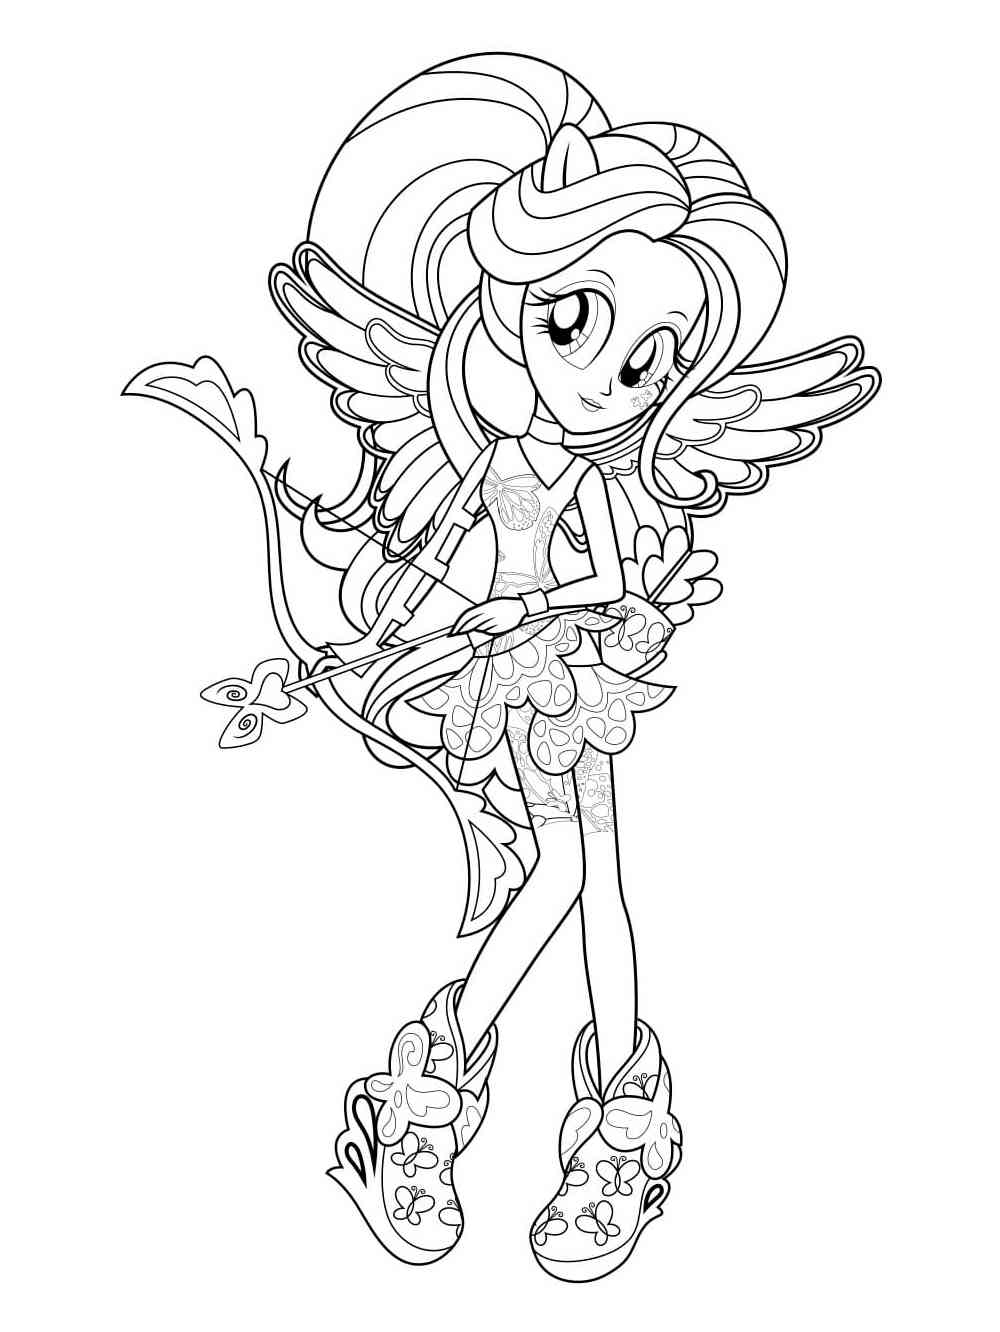 Equestria Girls 14 coloring page